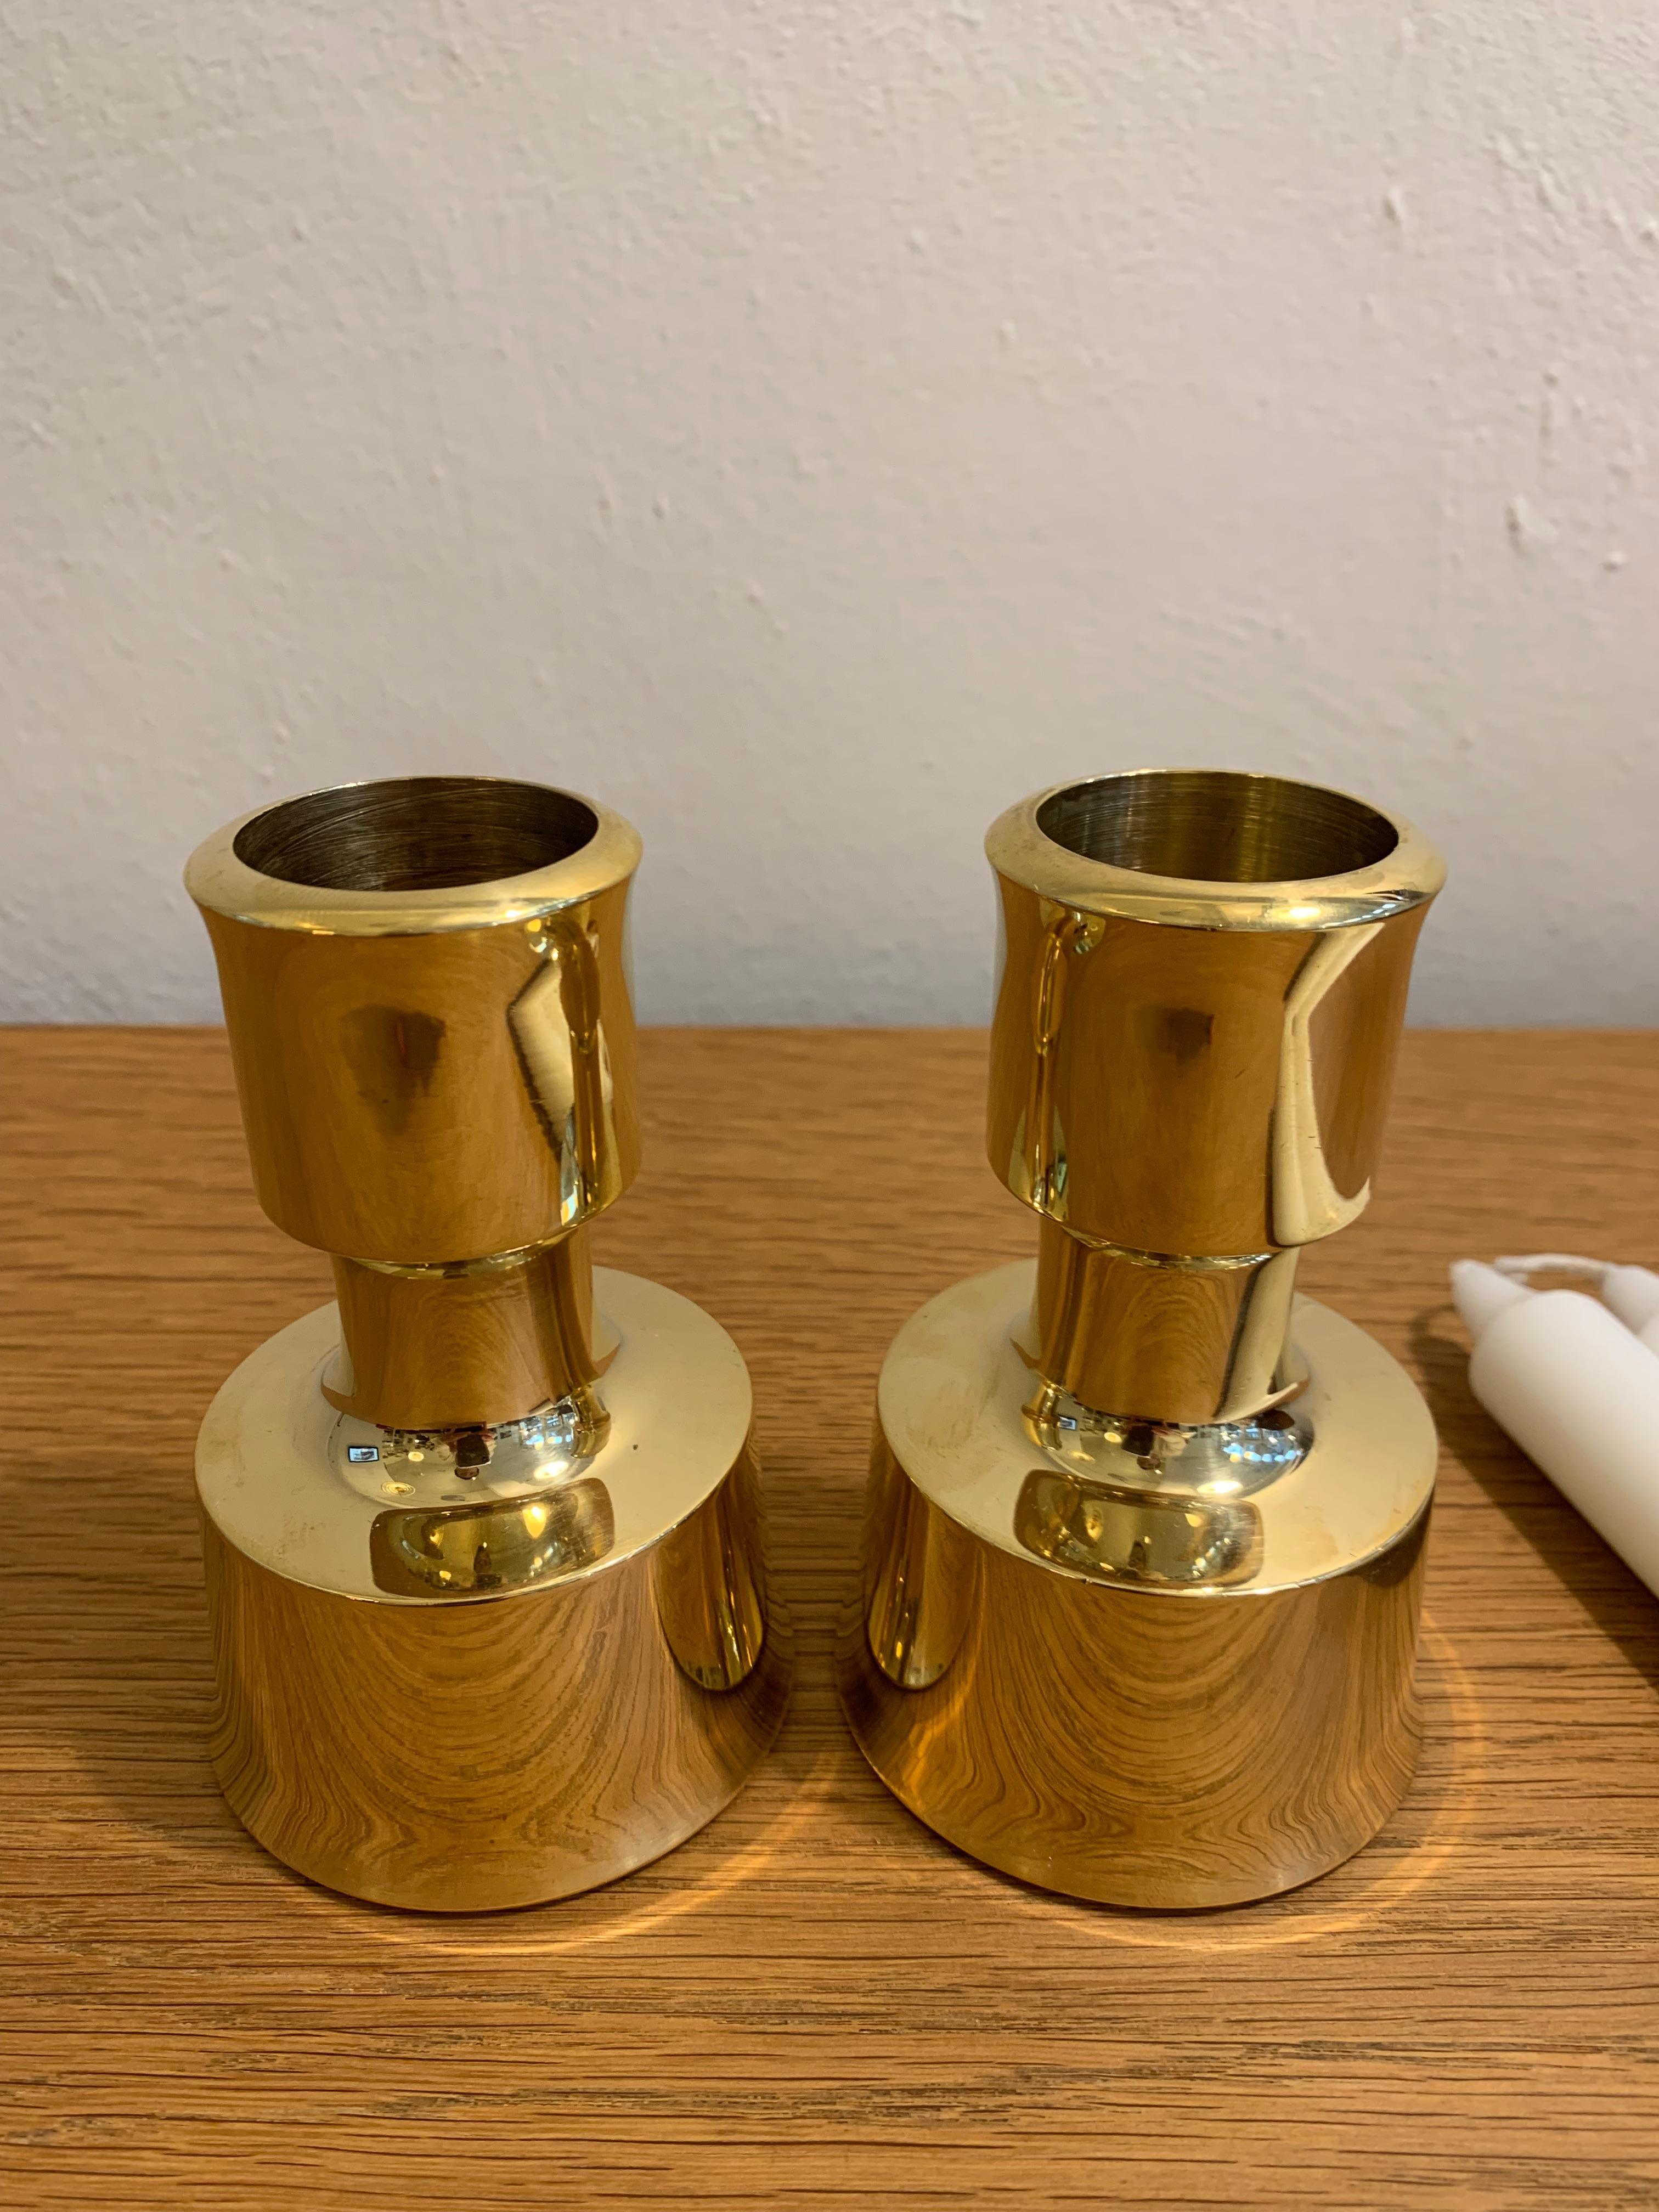 Finnish Pair of Solid Brass Candle Holders by Jens H. Quistgaard for Dansk Designs 1963 For Sale